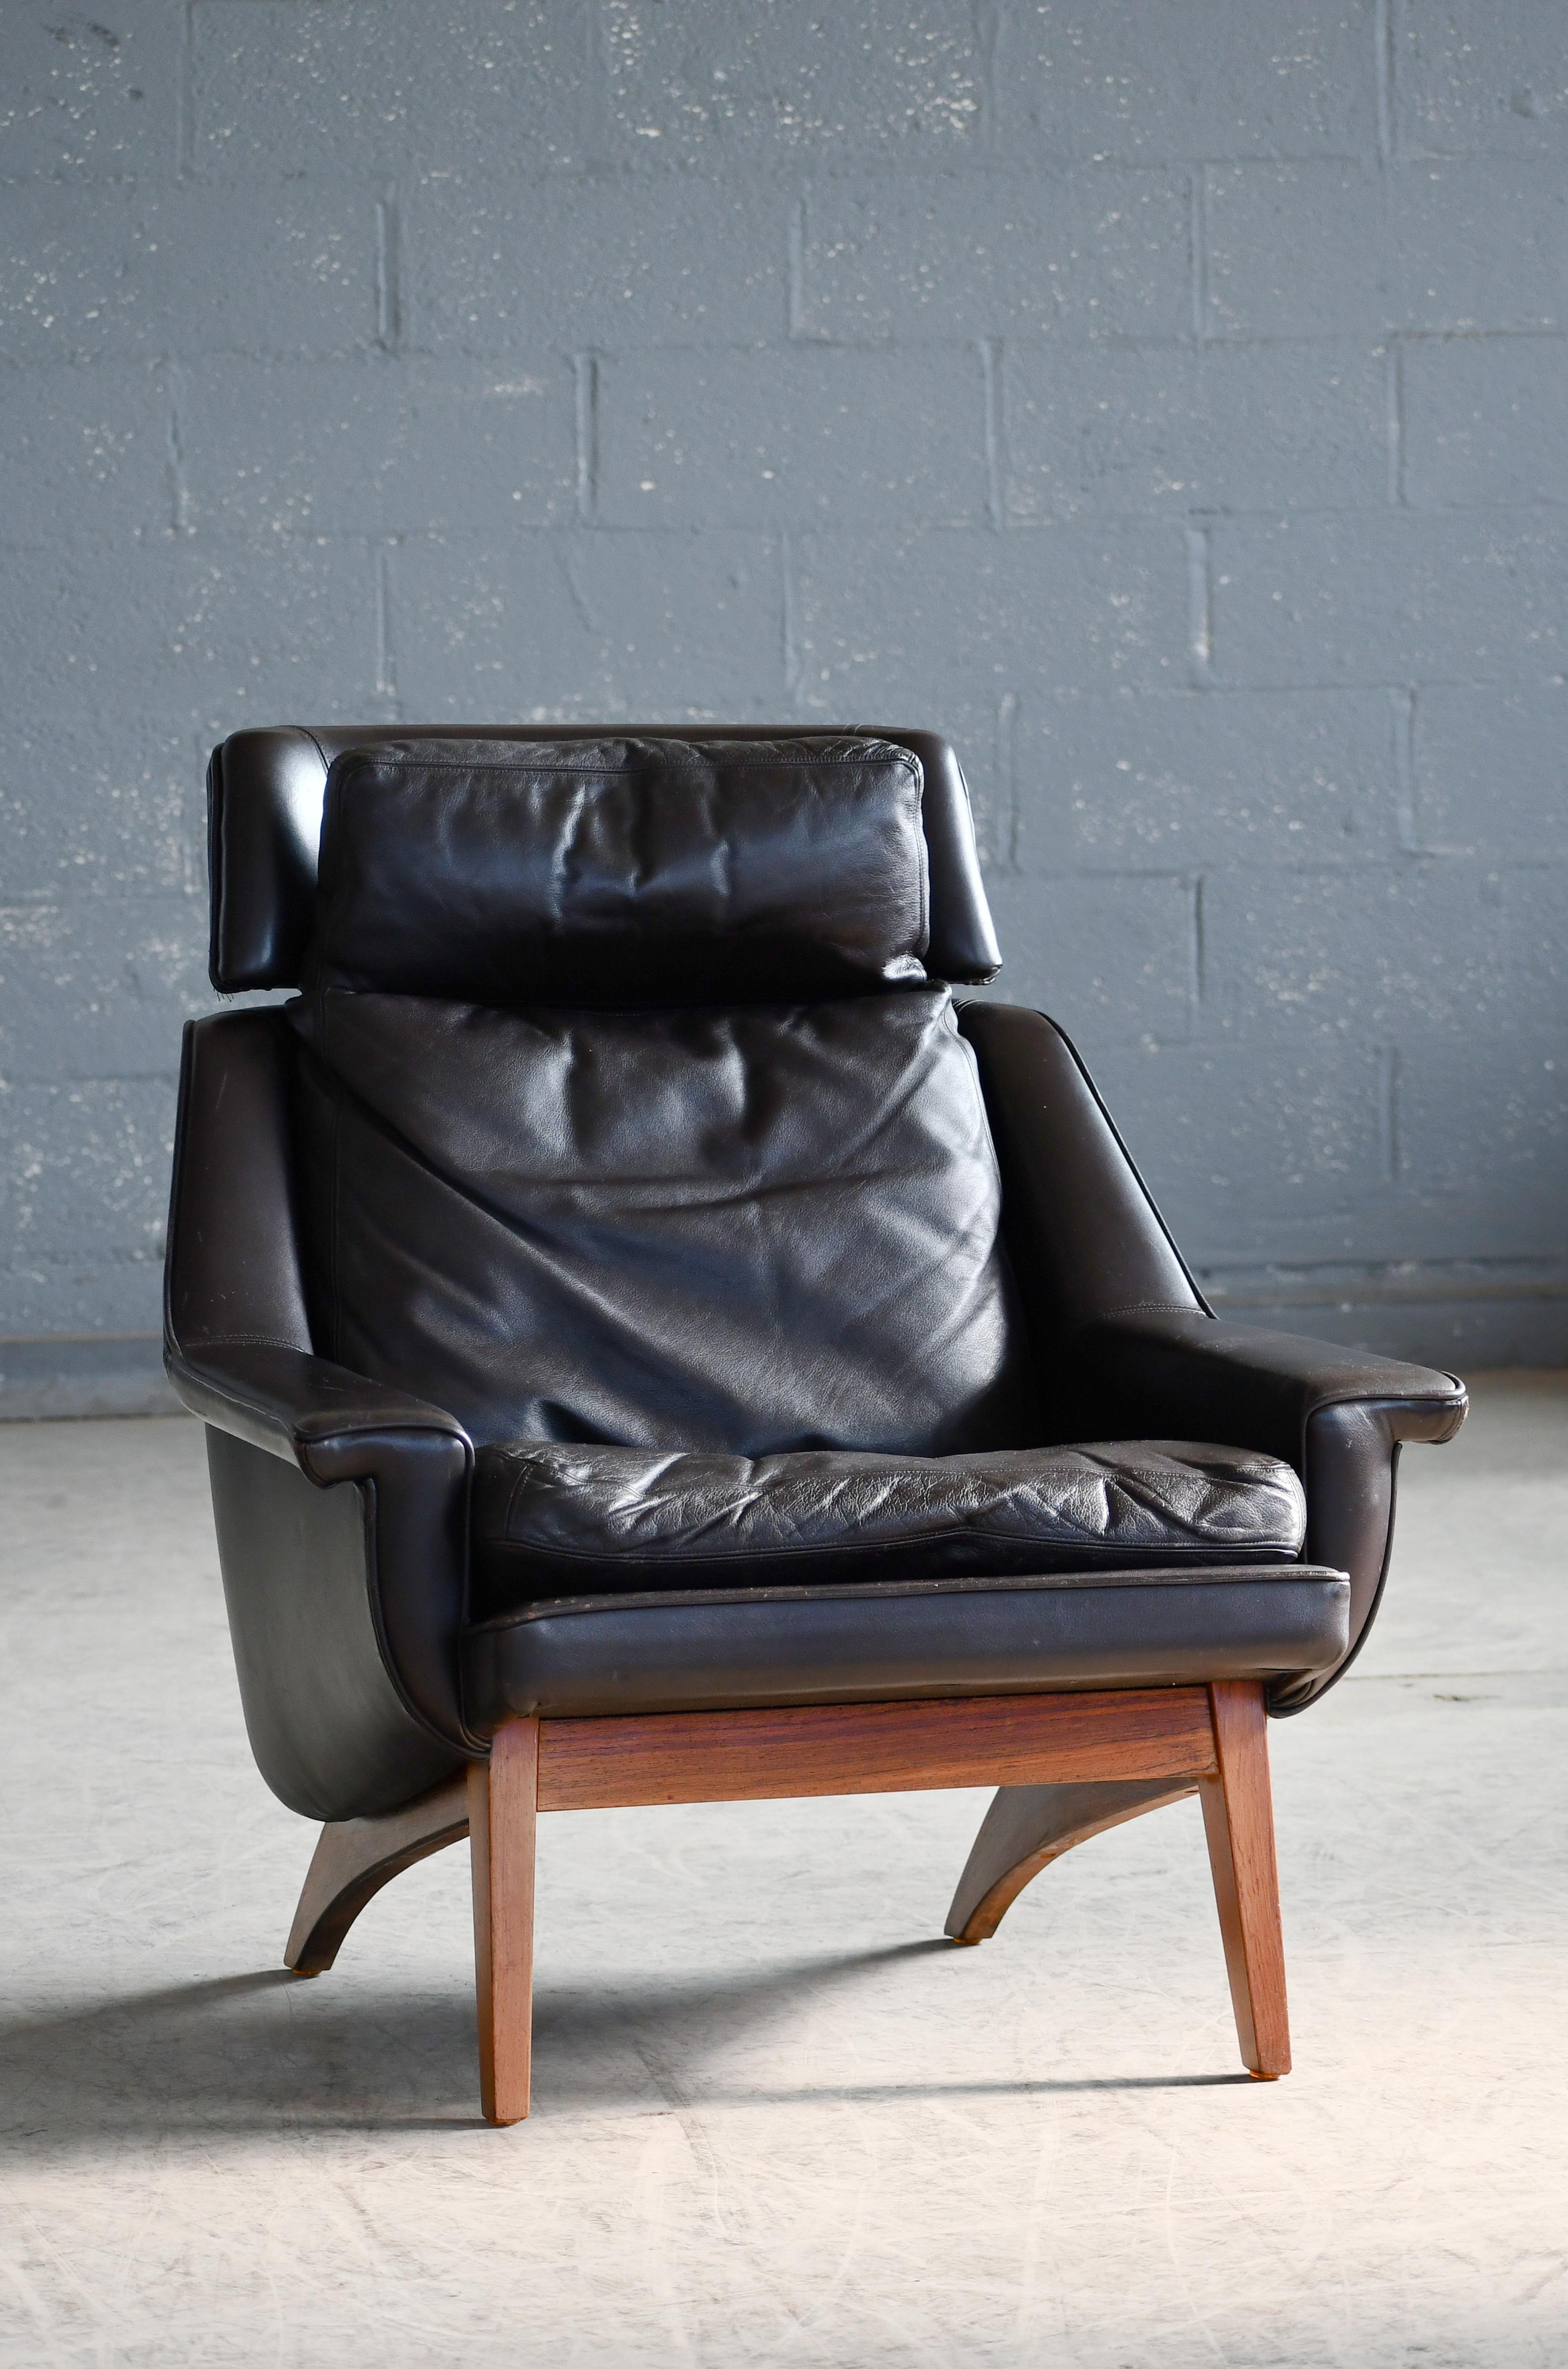 This Danish chair from the 60's is in general a rare find and even more so in this great condition. The lounge chair is from a company that was named ESA Møbelfabrik in Esbjerg Denmark and designed by an in-house designer named Langfeld. The company